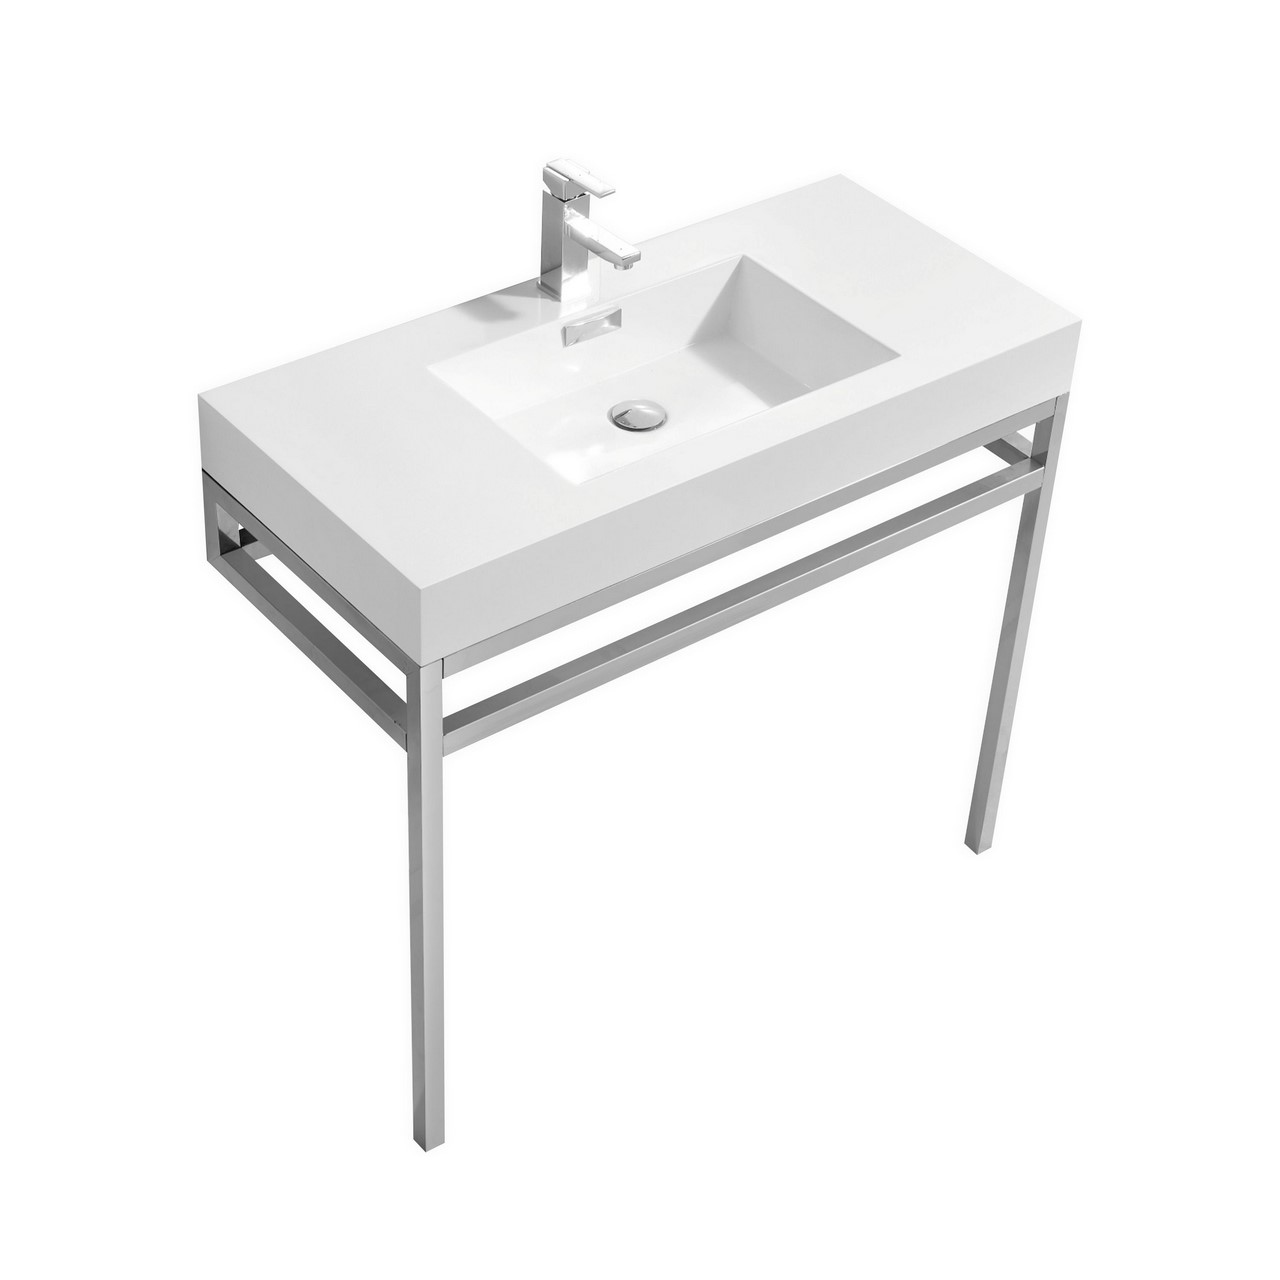 Modern Lux 40" Stainless Steel Console w/ White Acrylic Sink - Chrome